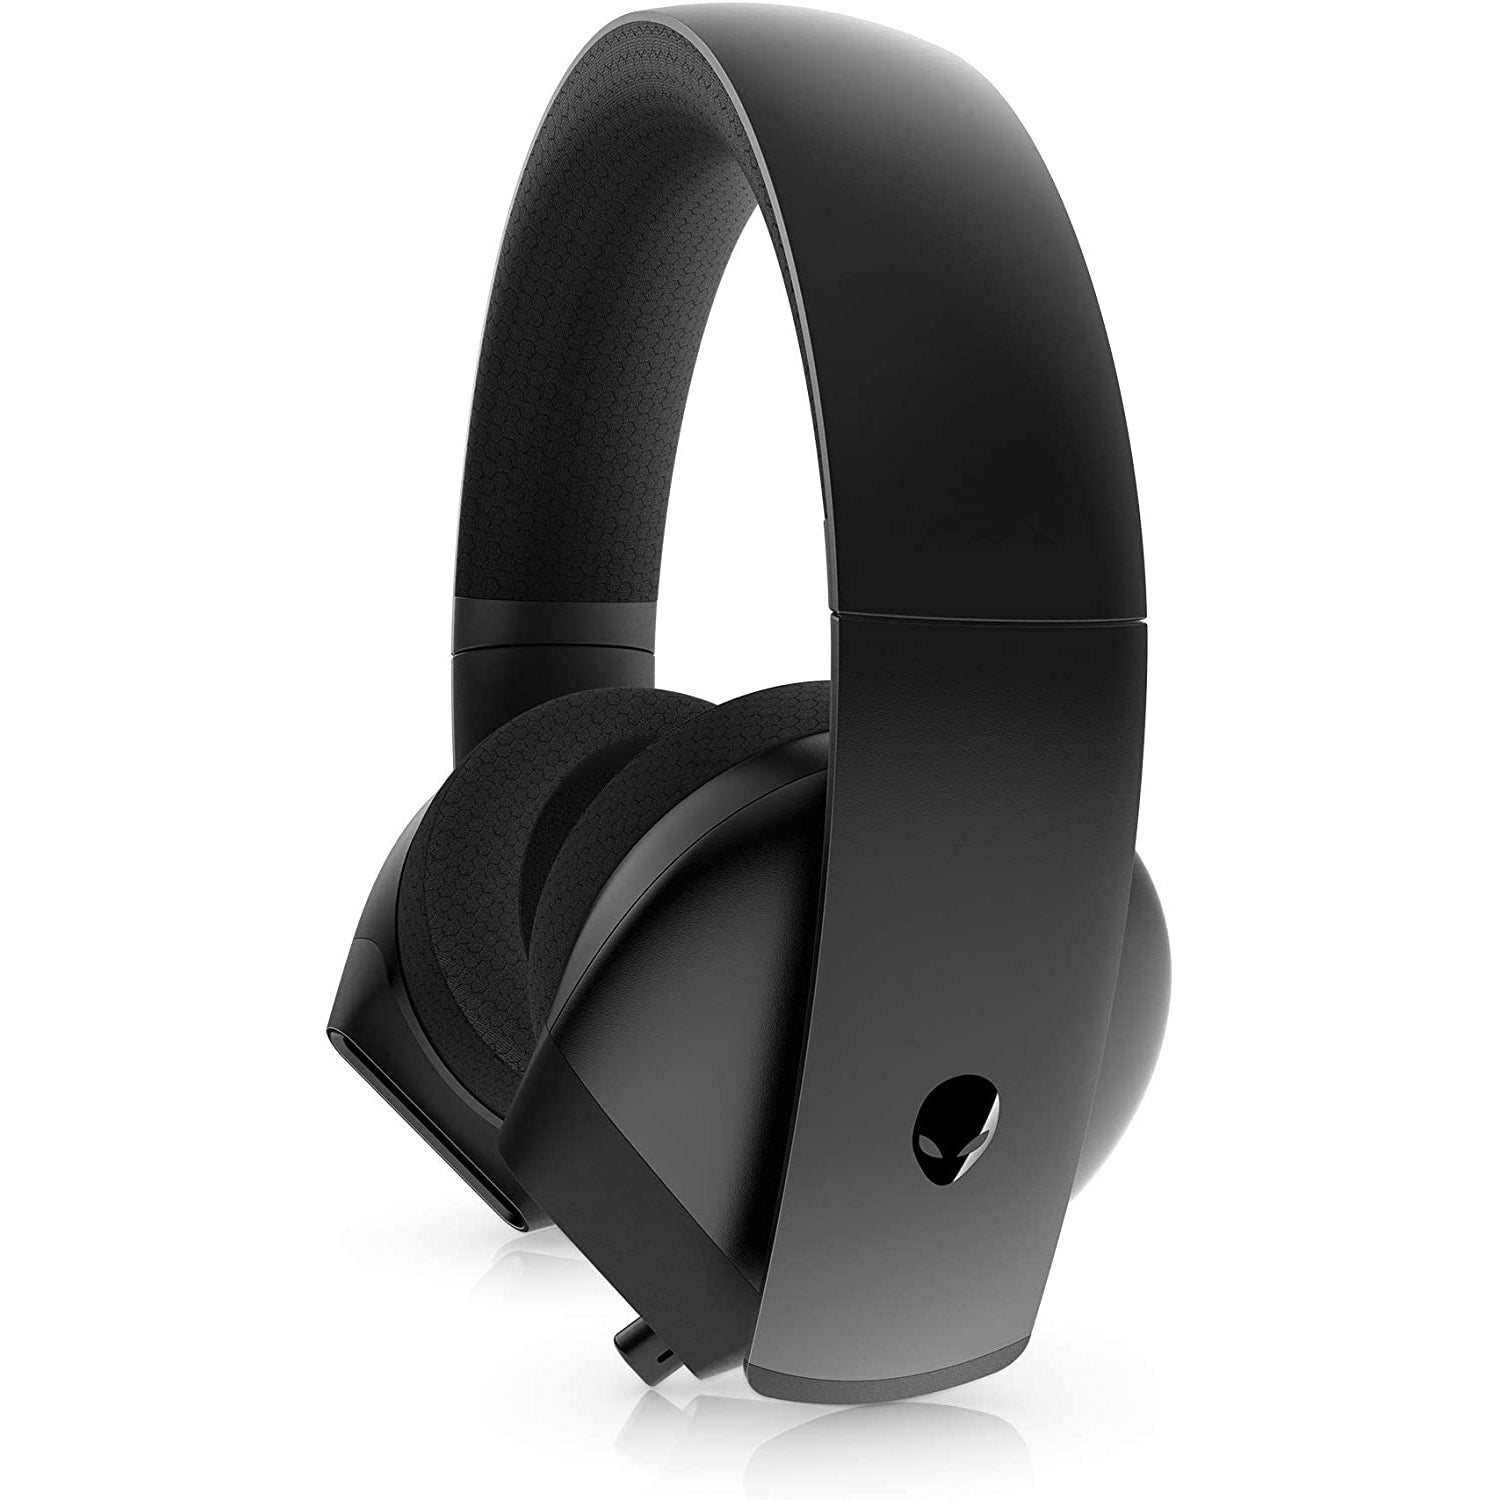 Alienware Stereo PC Gaming Headset AW310H Works with PS4, Xbox One & Switch via 3.5mm Jack, Black